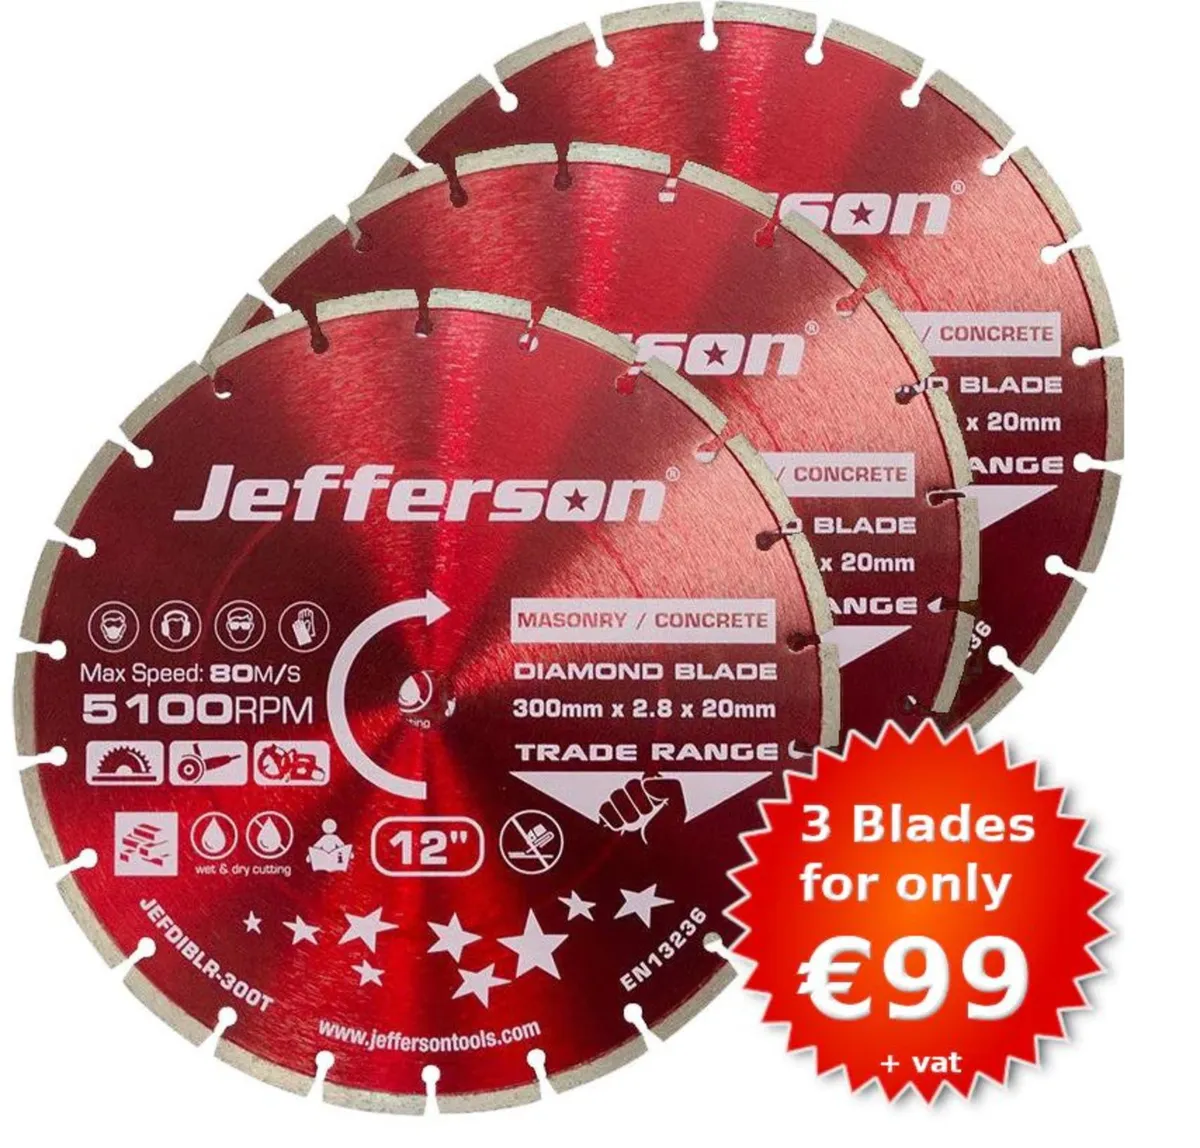 3 DIAMOND TIP CONSAW BLADES ONLY €99+VAT!!! - Image 1